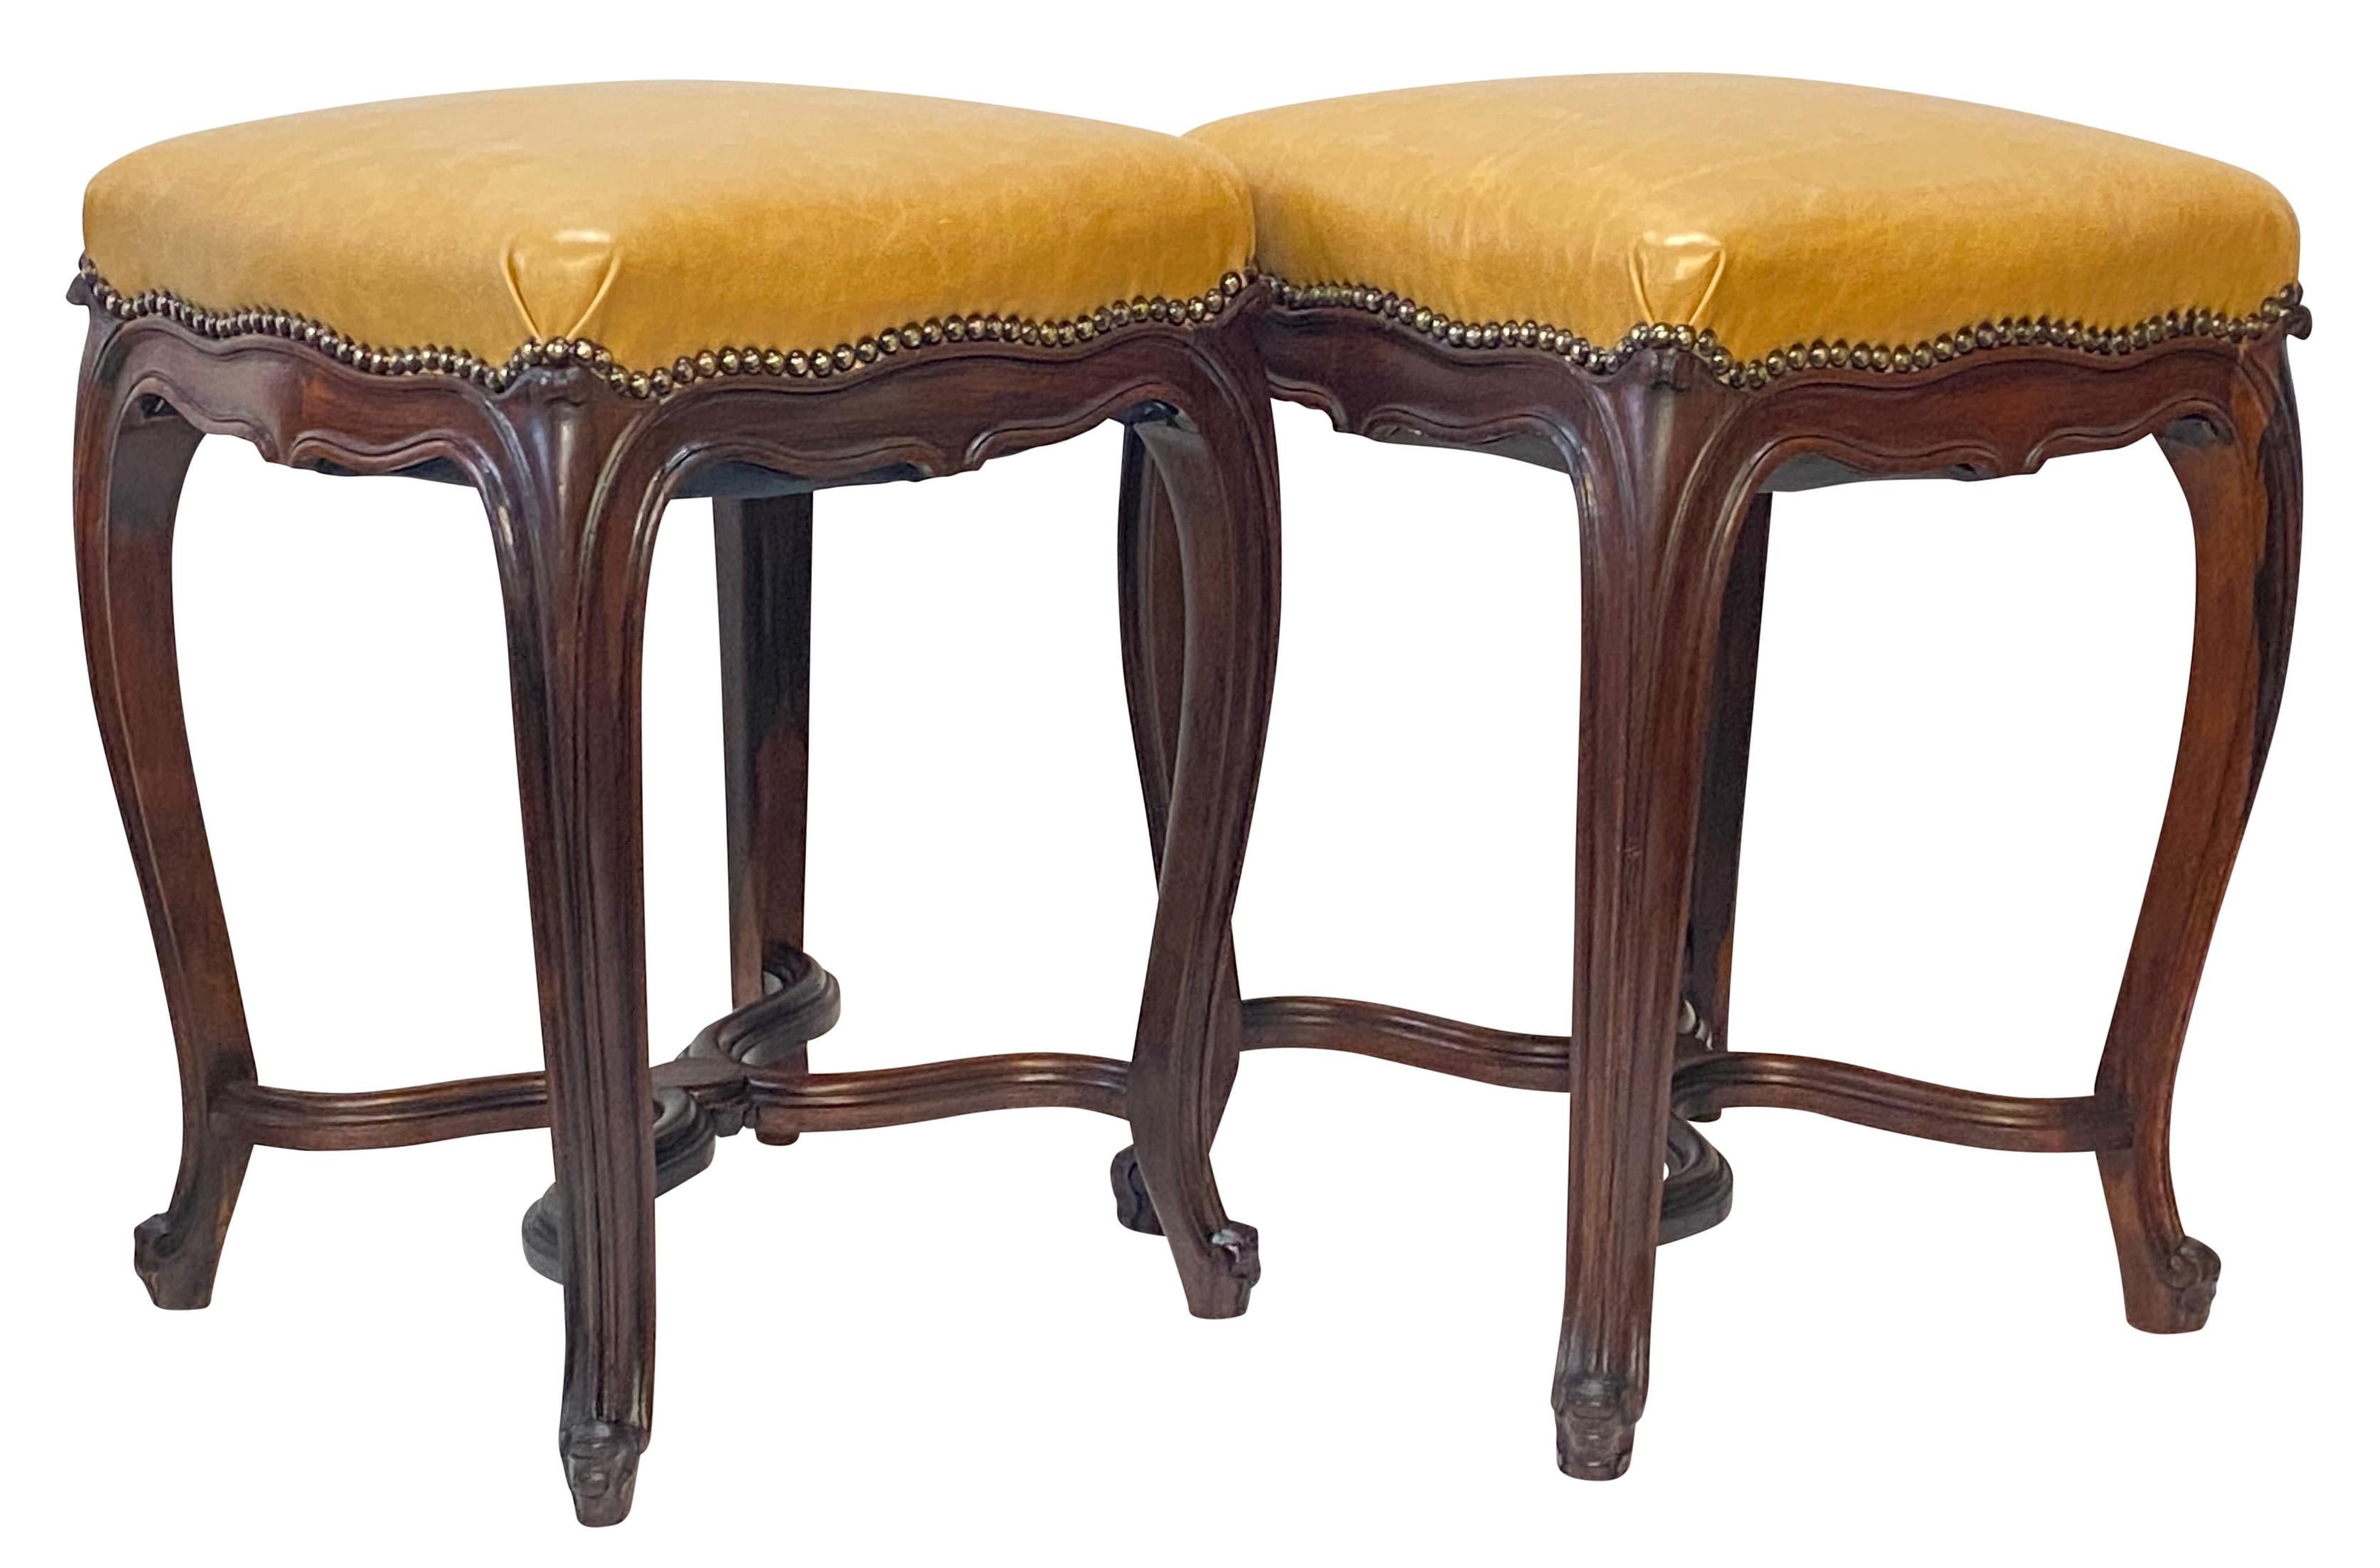 A pair of elegant Louis XV style carved rosewood stools or tabourets with nailhead detail, and recently recovered with leather upholstery.
In excellent condition, sturdy and sound
France, 19th century.